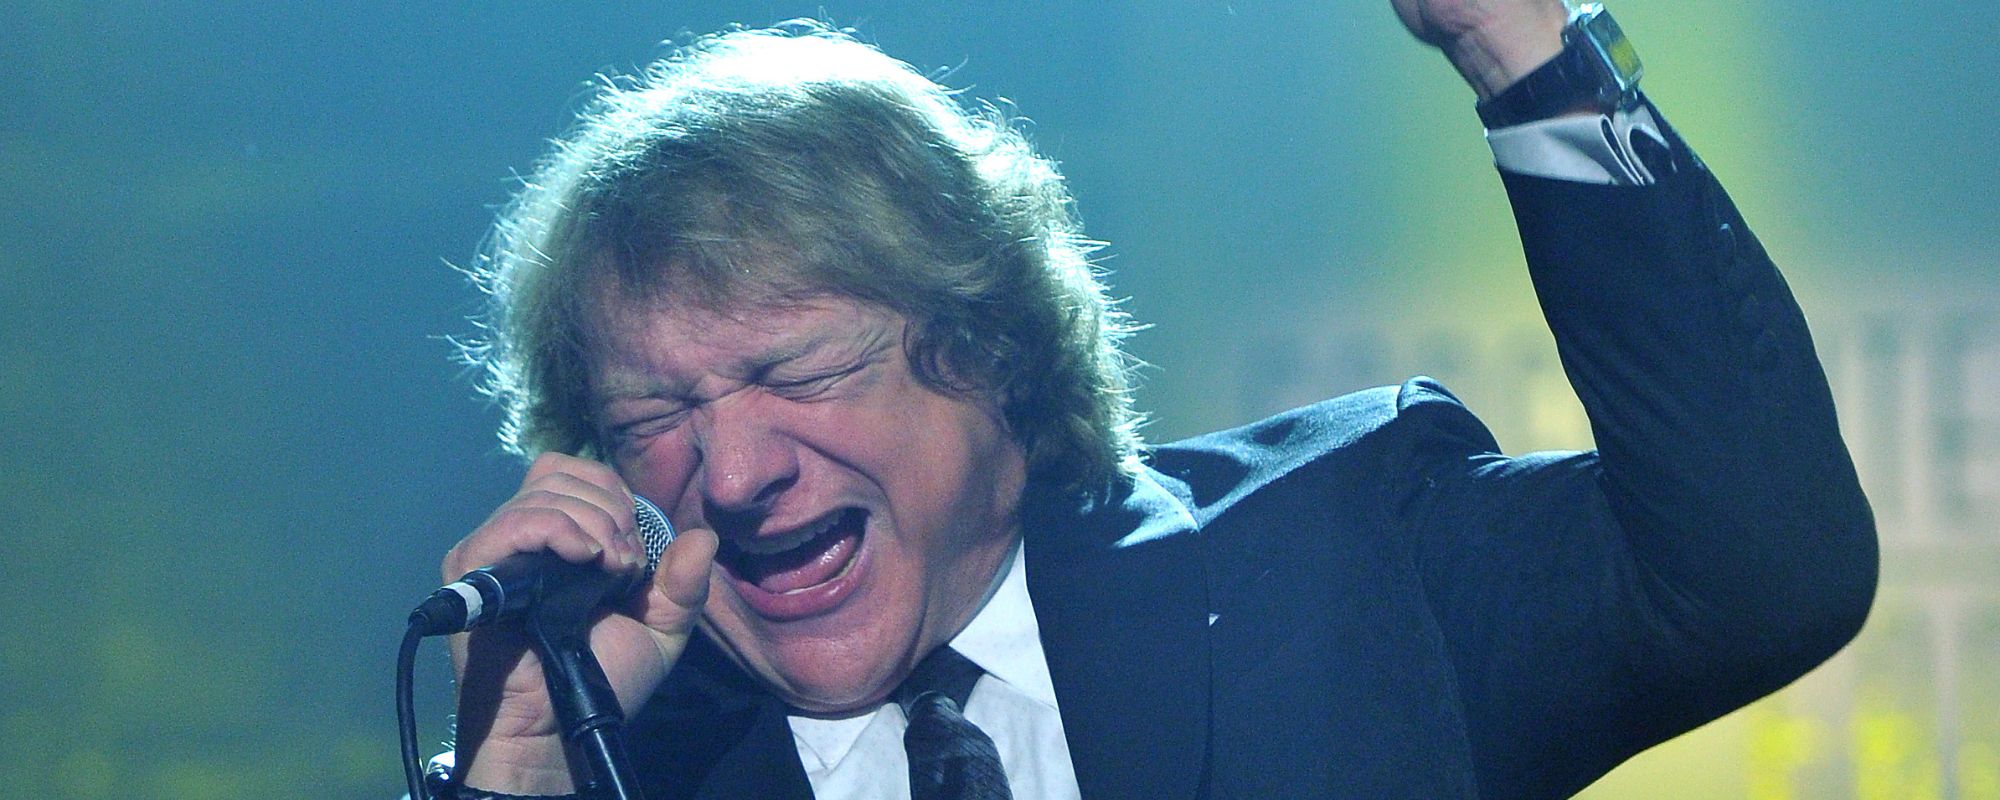 Lou Gramm Has Devised a Plan to Perform This Foreigner Song at Hall of Fame Induction